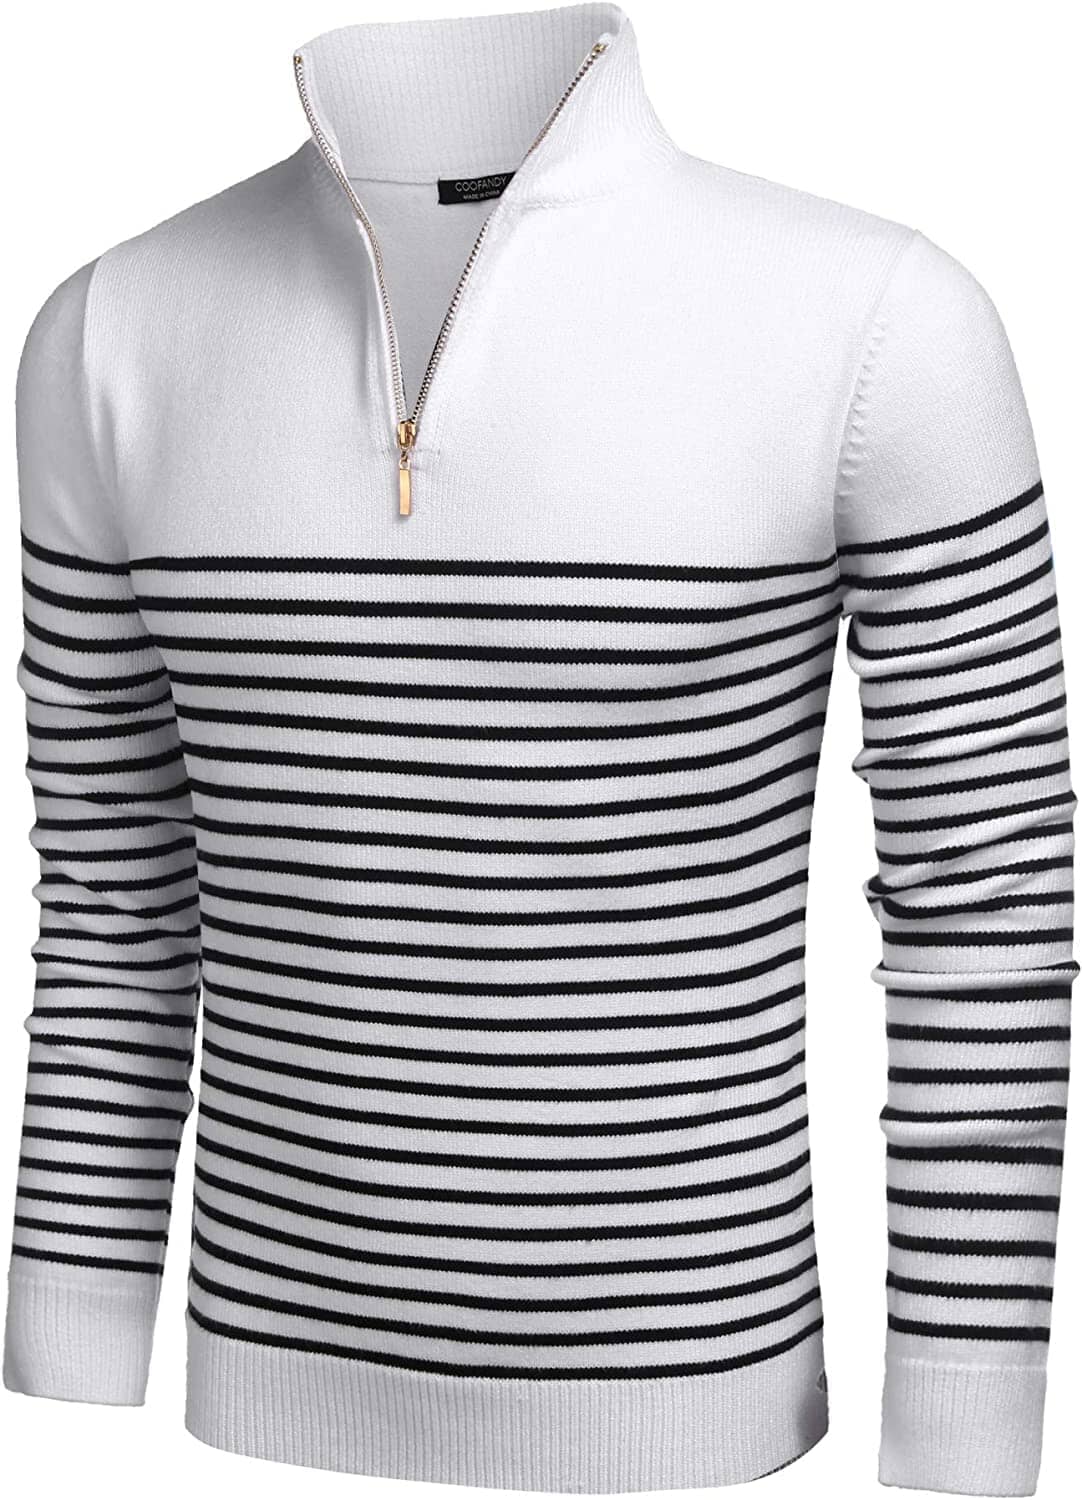 Coofandy Striped Zip Up Mock Neck Pullover Sweaters (US Only) Fashion Hoodies & Sweatshirts Simbama White S 